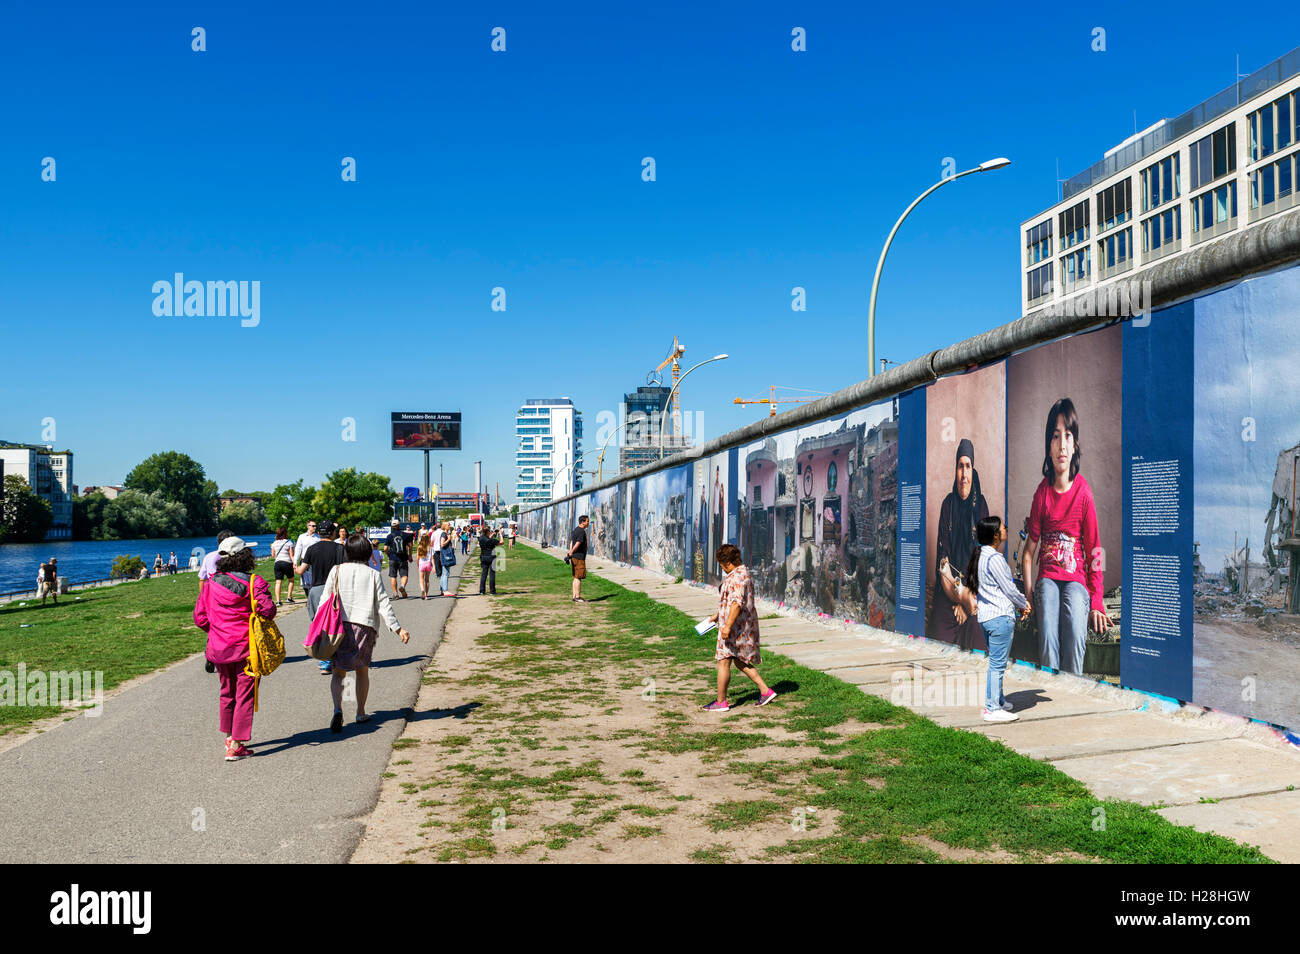 Section of the Berlin Wall at the East Side Gallery, Friedrichshain-Kreuzberg, Berlin, Germany Stock Photo